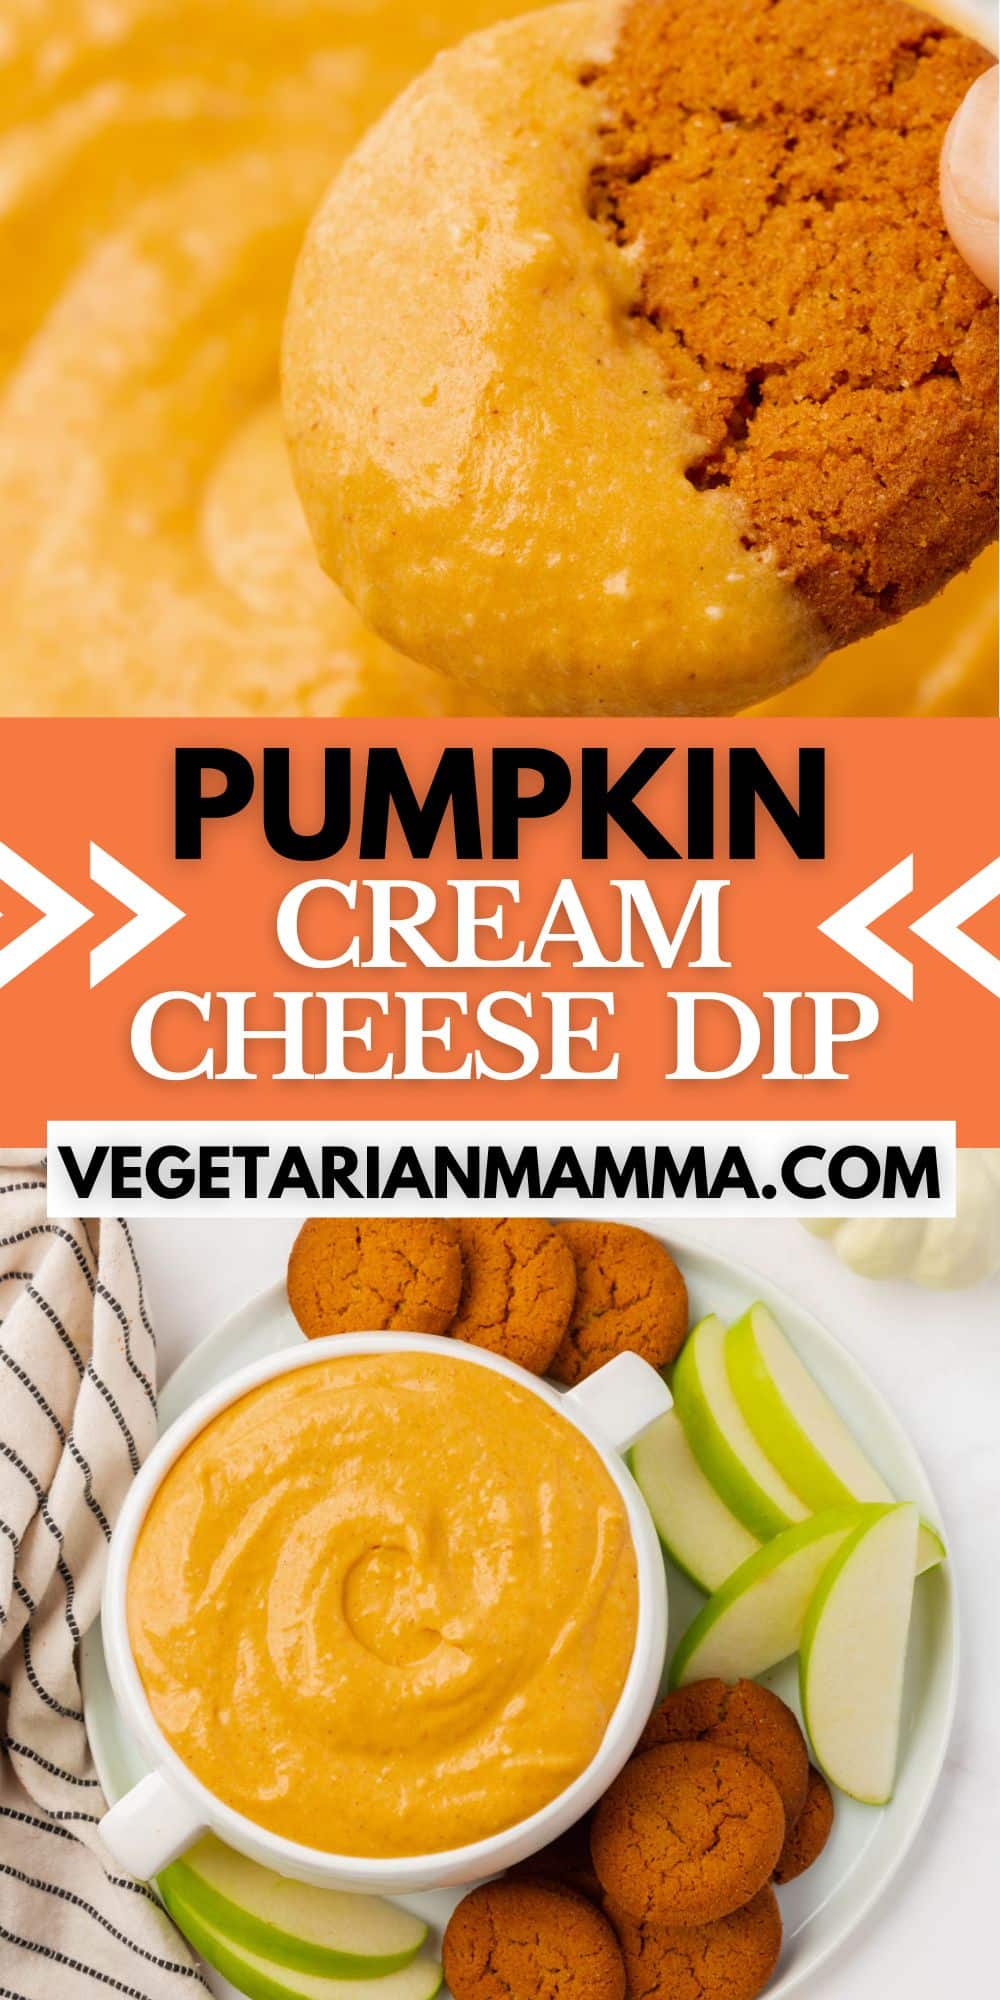 When you need a super easy 5-minute dessert for a fall or autumn event, Pumpkin Cream Cheese dip is perfect! Dig into this pumpkin spice dip recipe with crispy gingersnaps, or choose a healthier route and make pumpkin cream cheese dip for apples.